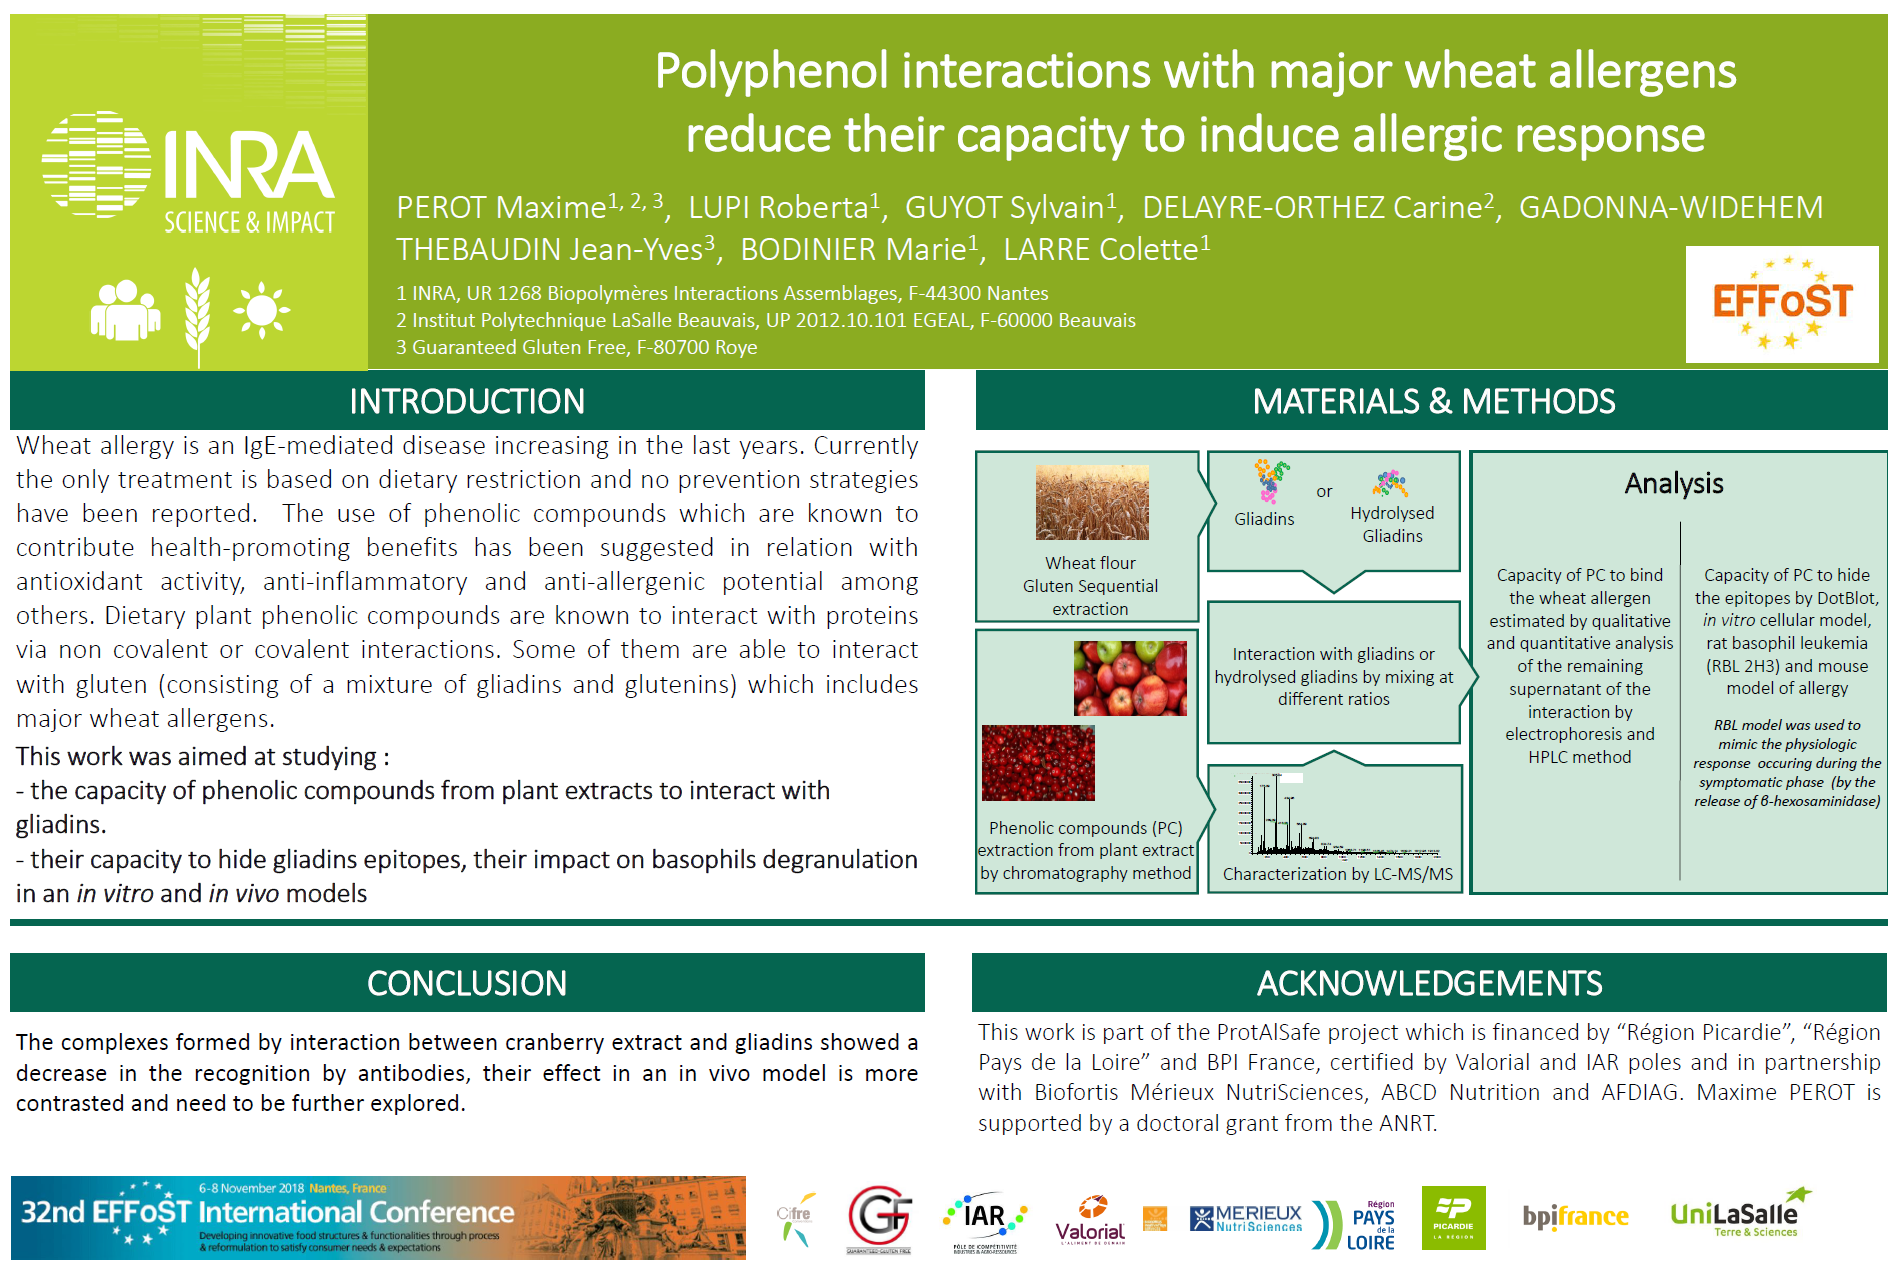 Polyphenol interactions with major wheat allergens reduce their capacity to induce allergic response